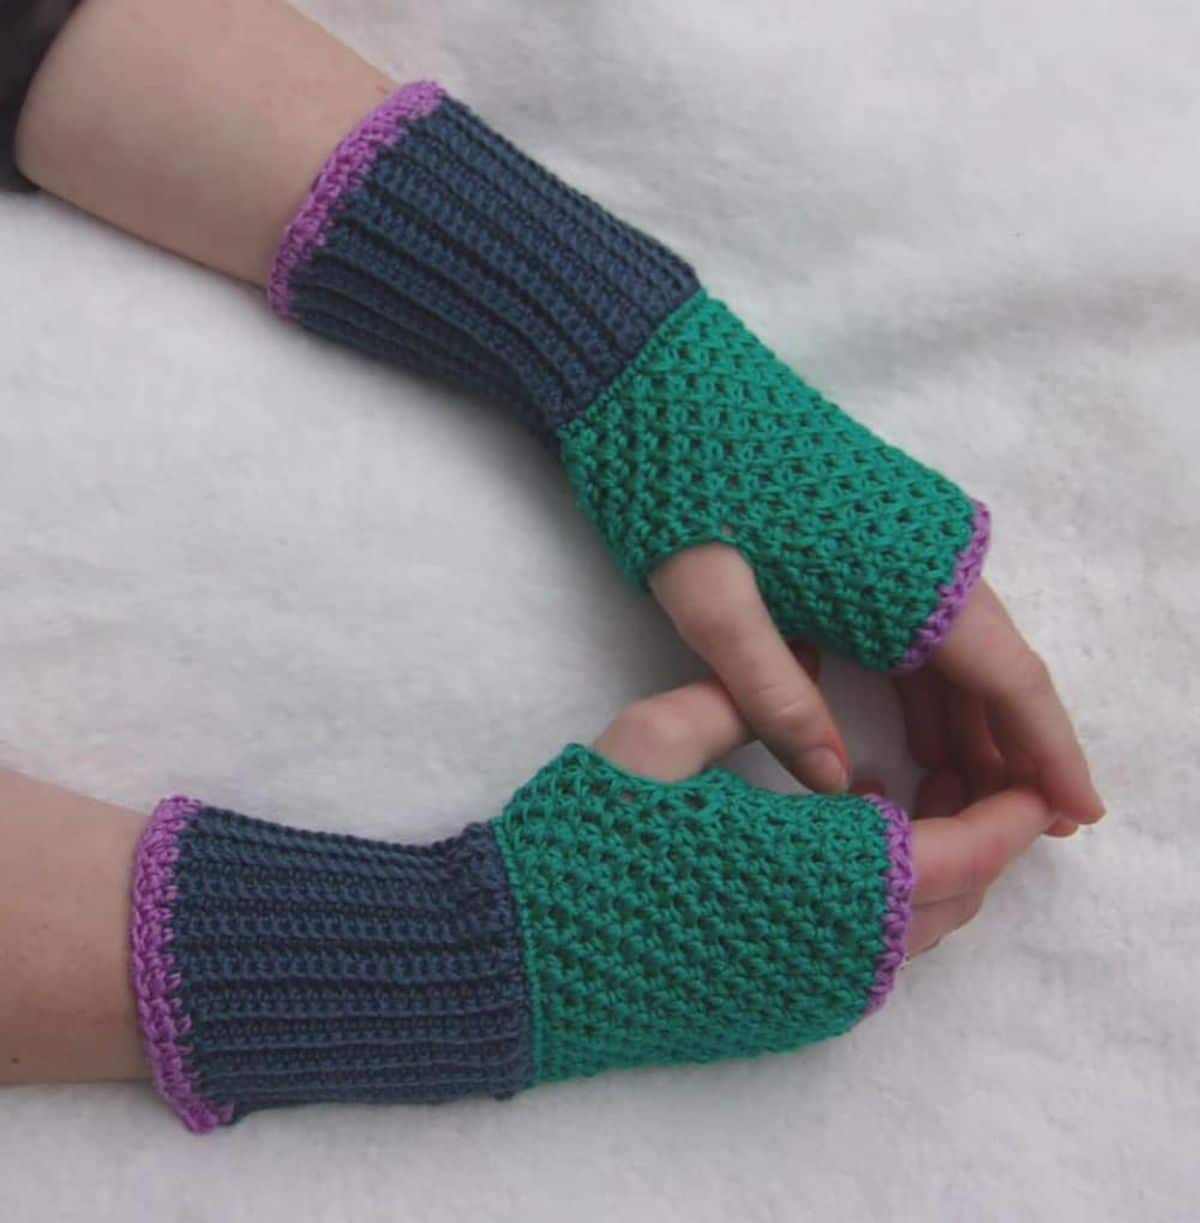 Purple and green fingerless gloves with the colors in large blocks and worn by hands on a white background.